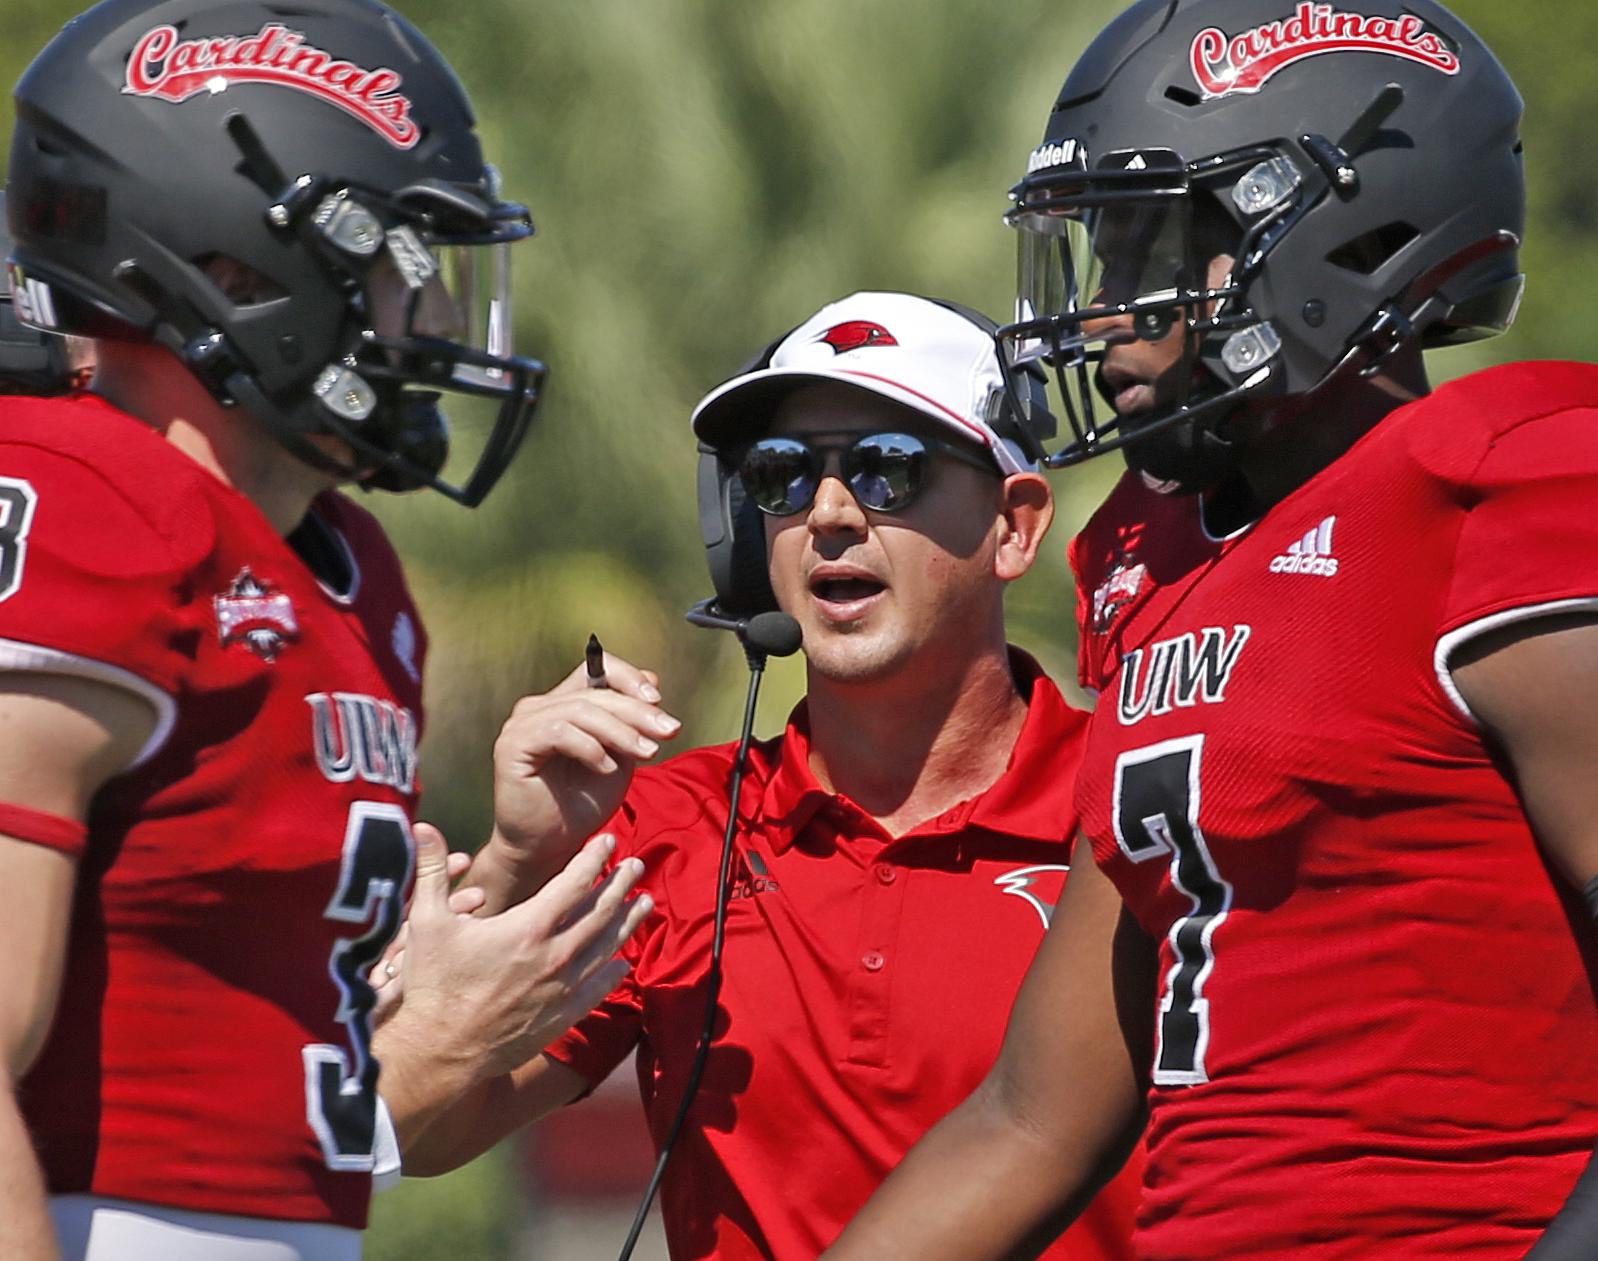 Through season of firsts, UIW keeps focus on finishing